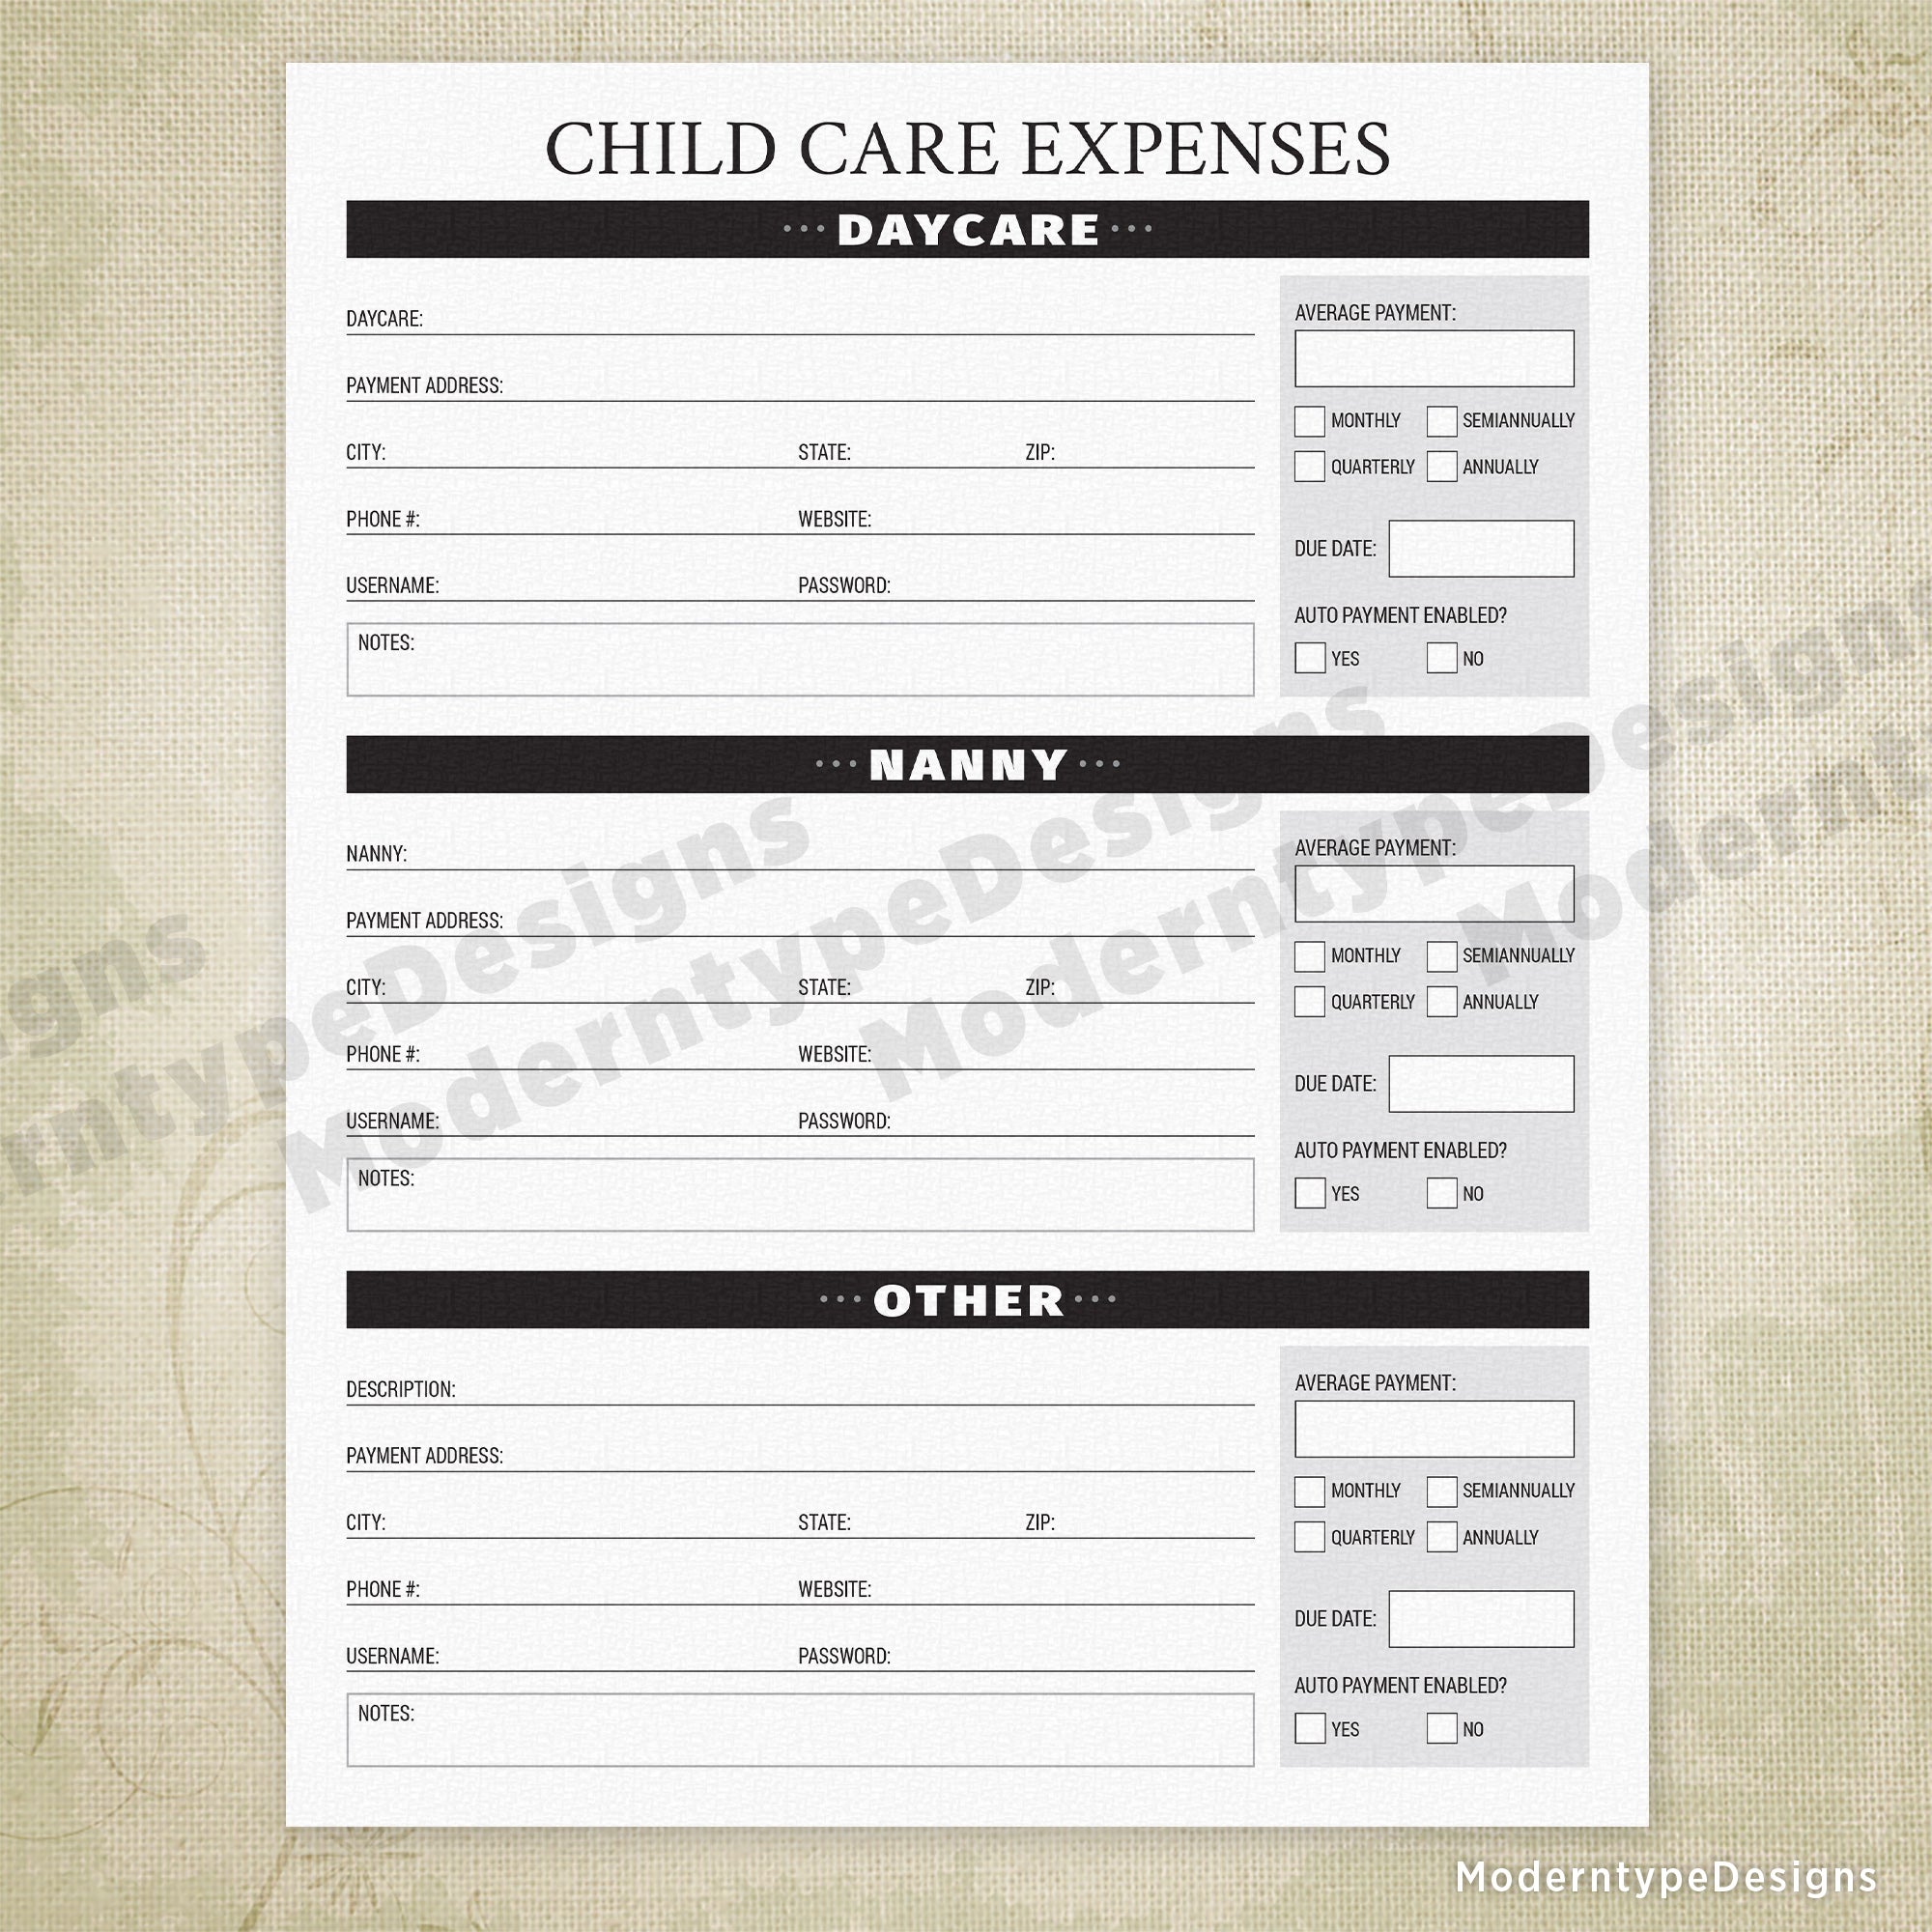 Child Care Expenses Printable - End of Life